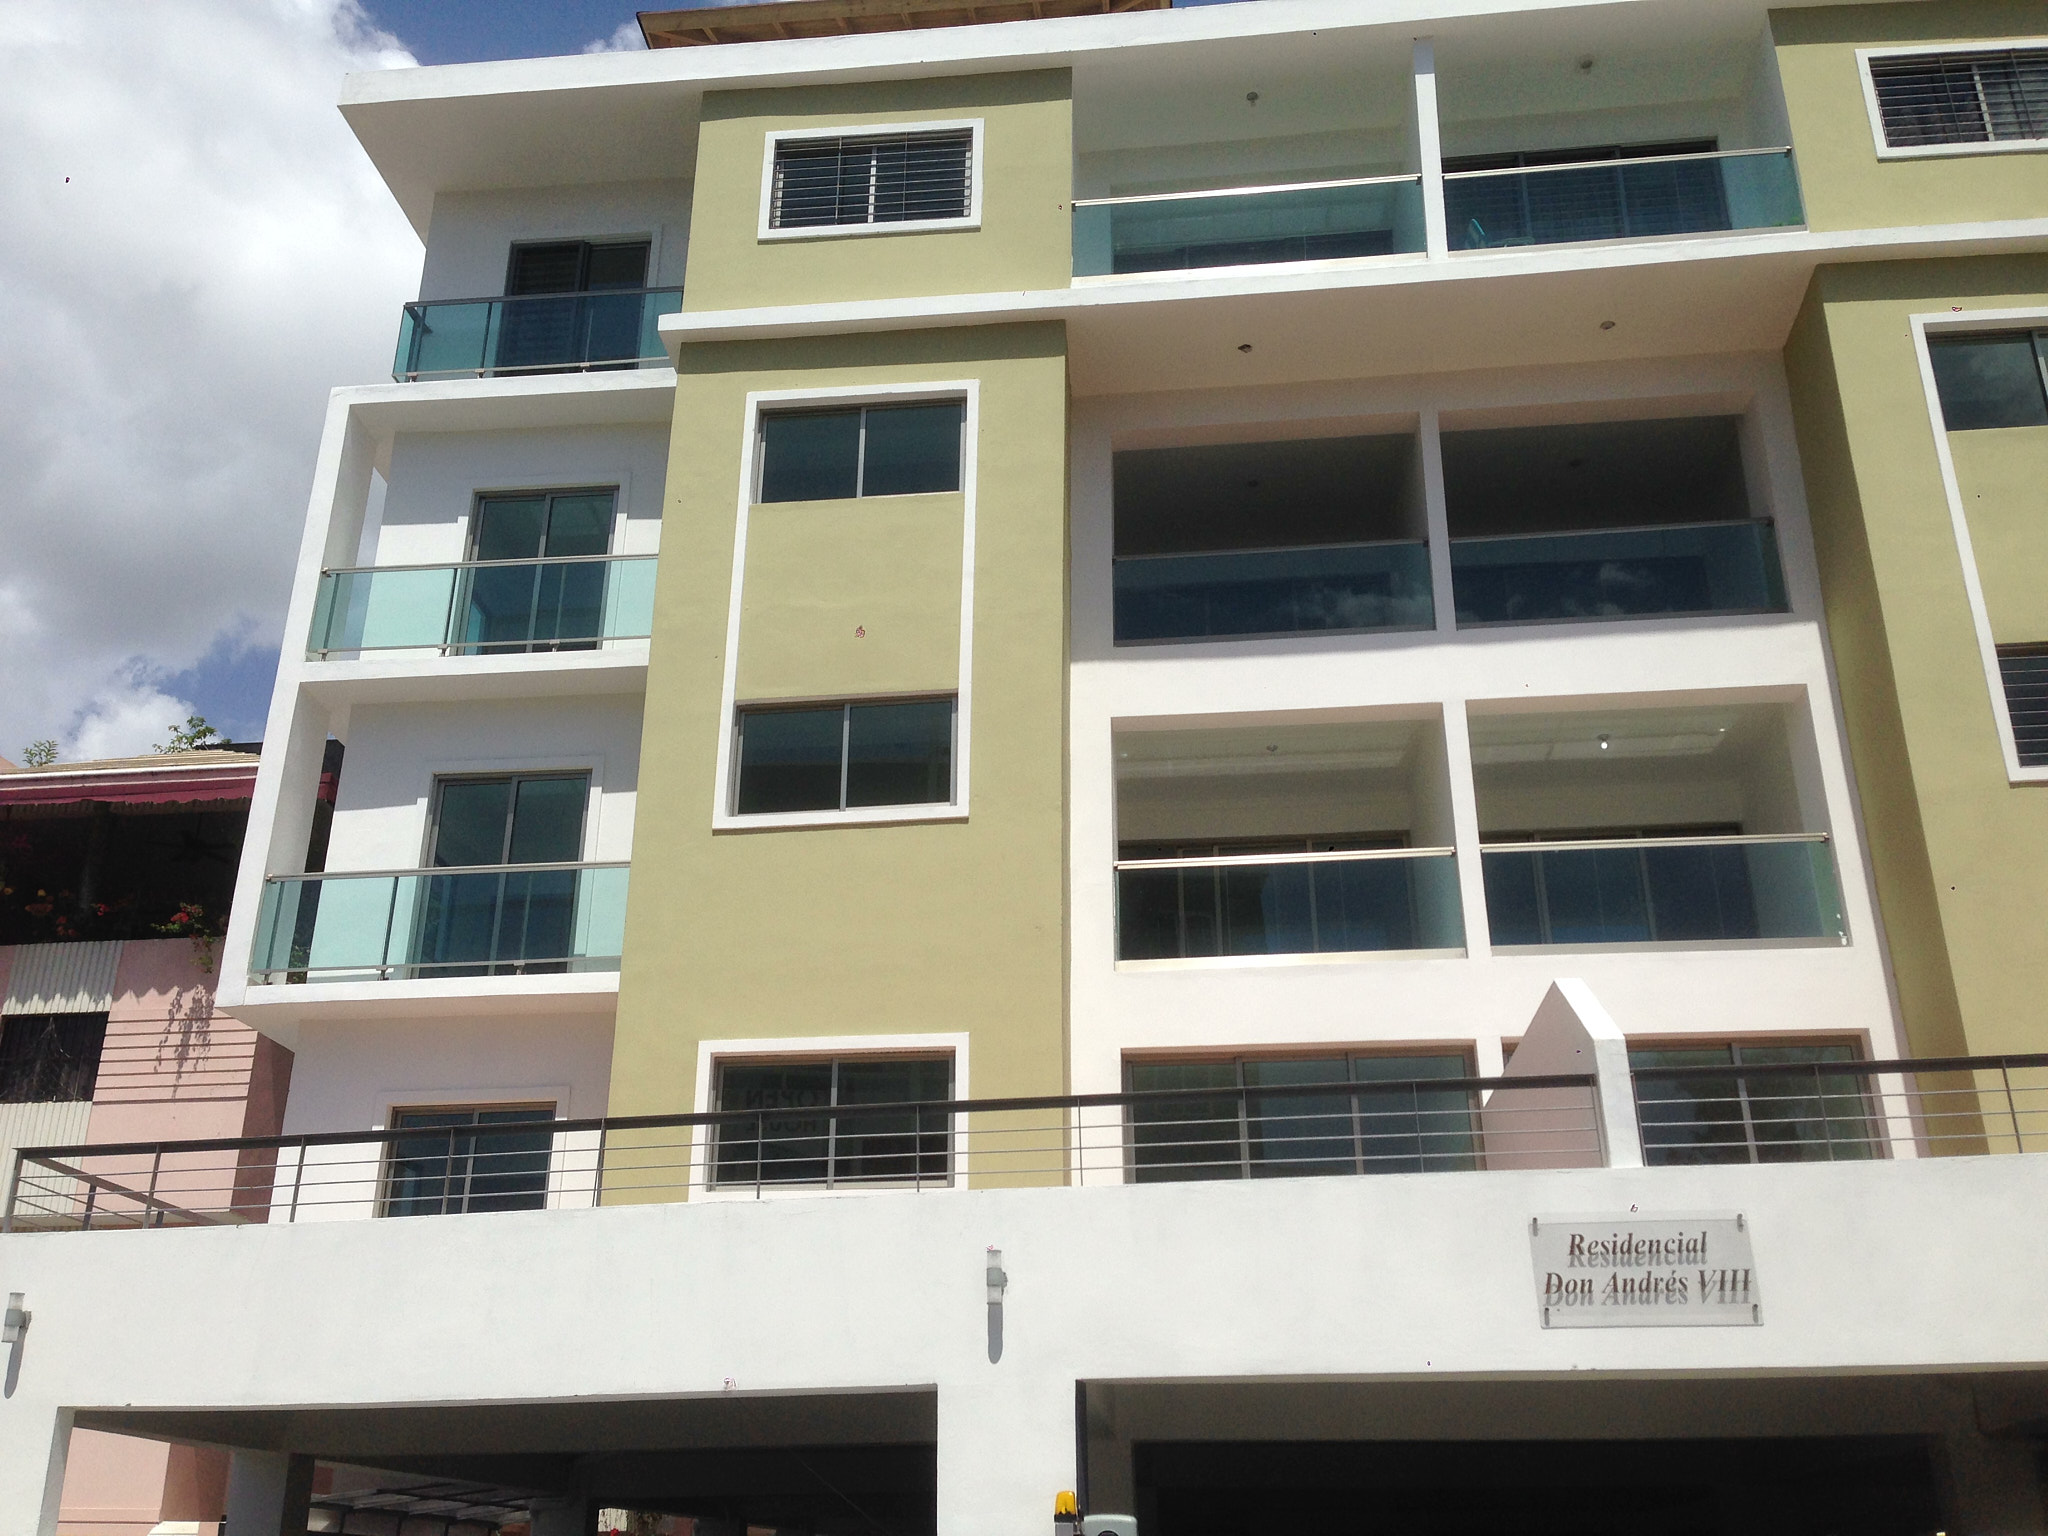 Residencial Don Andres VIII